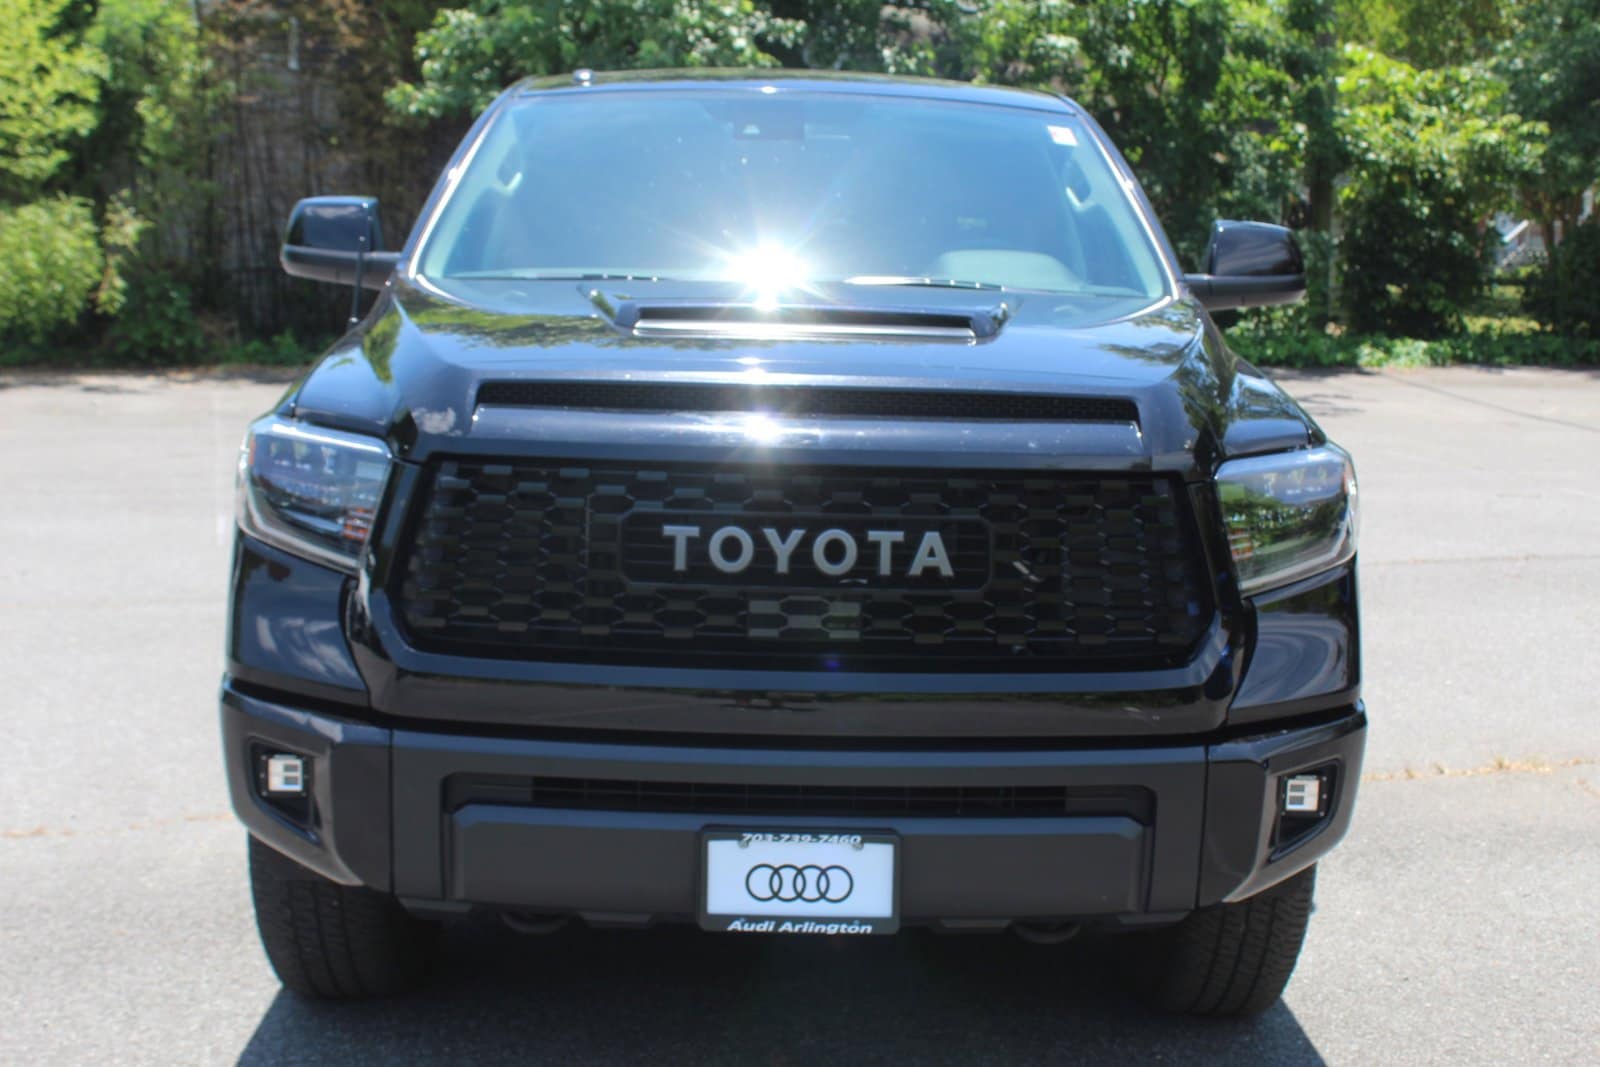 Used 2019 Toyota Tundra TRD Pro with VIN 5TFDY5F18KX837340 for sale in Arlington, VA